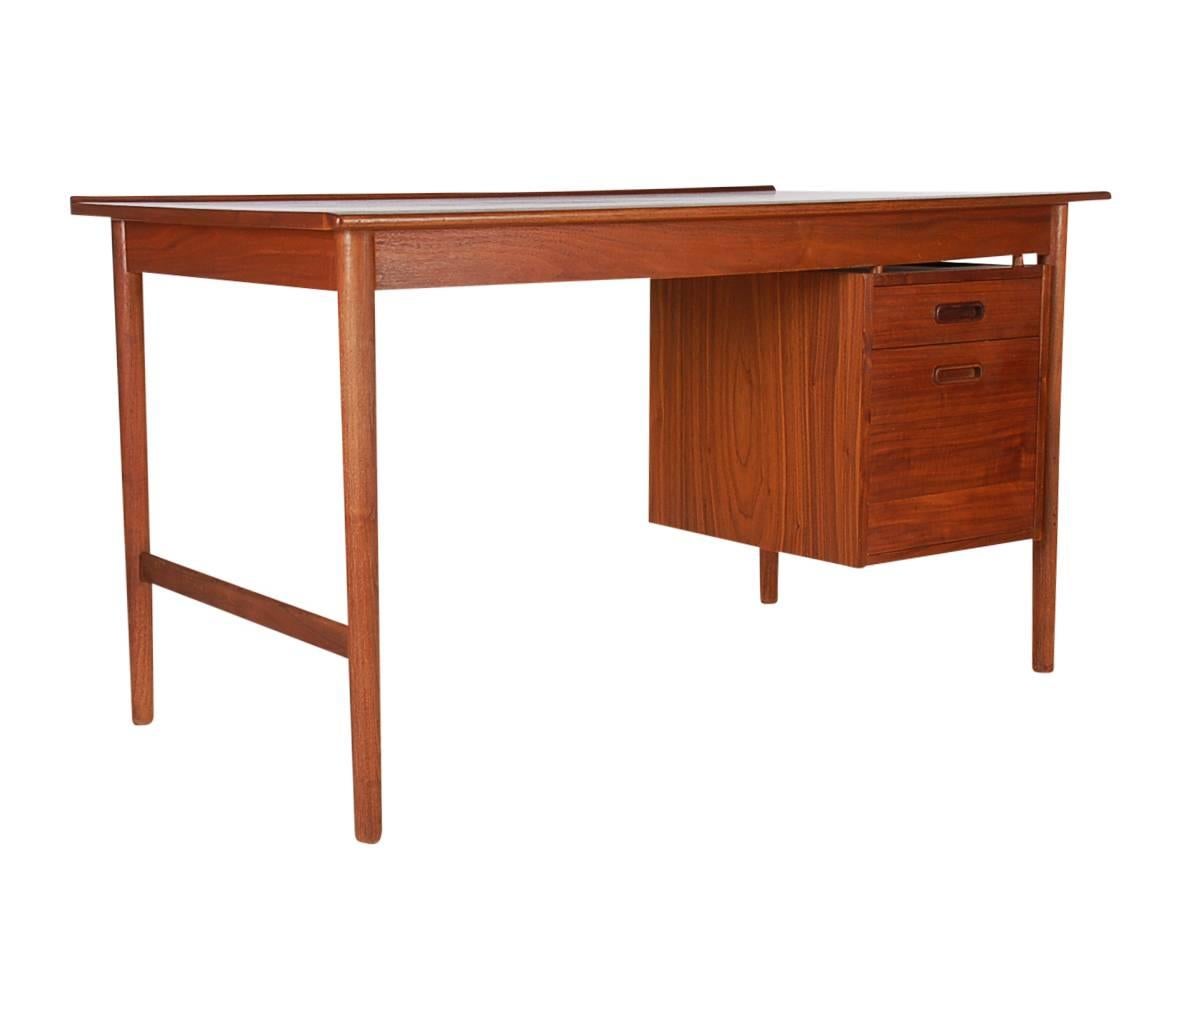 A matching pair of Danish modern desks (Model 541) designed by Folke Ohlsson for DUX. These are uncommon because they have walnut tops. These beautiful desk are priced each. Two are currently available.